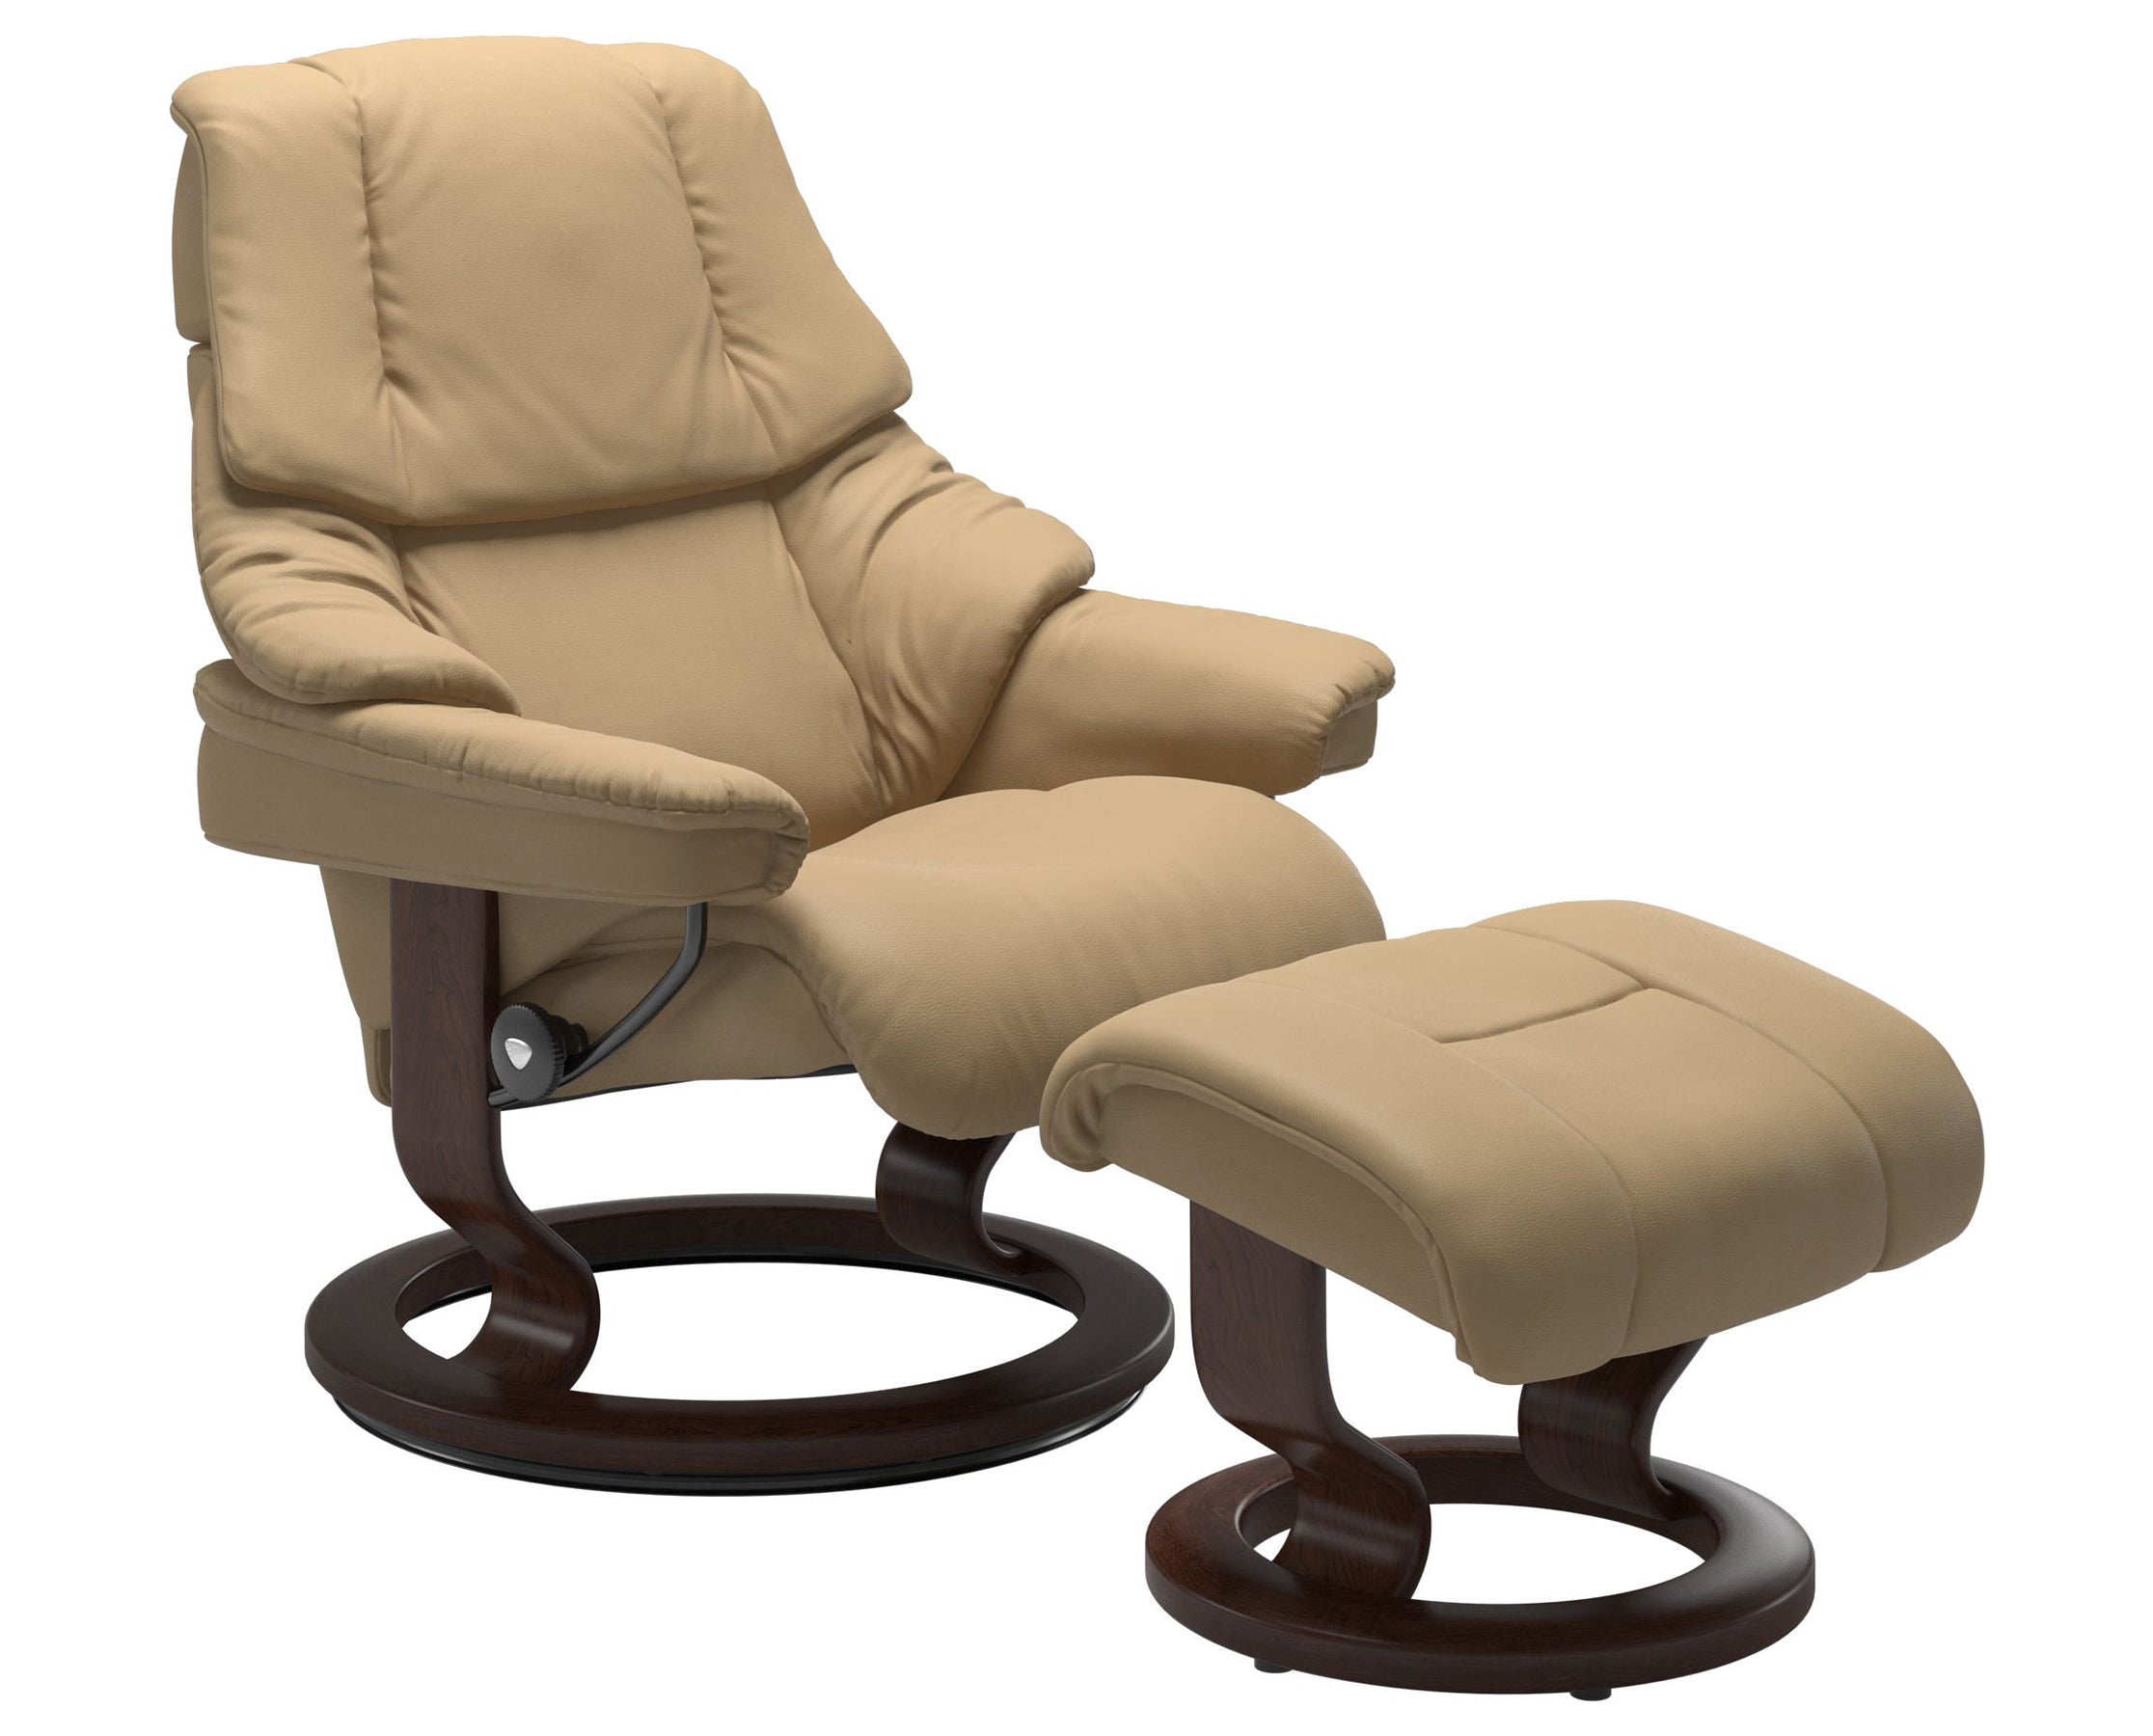 Paloma Leather Sand S/M/L and Brown Base | Stressless Reno Classic Recliner | Valley Ridge Furniture